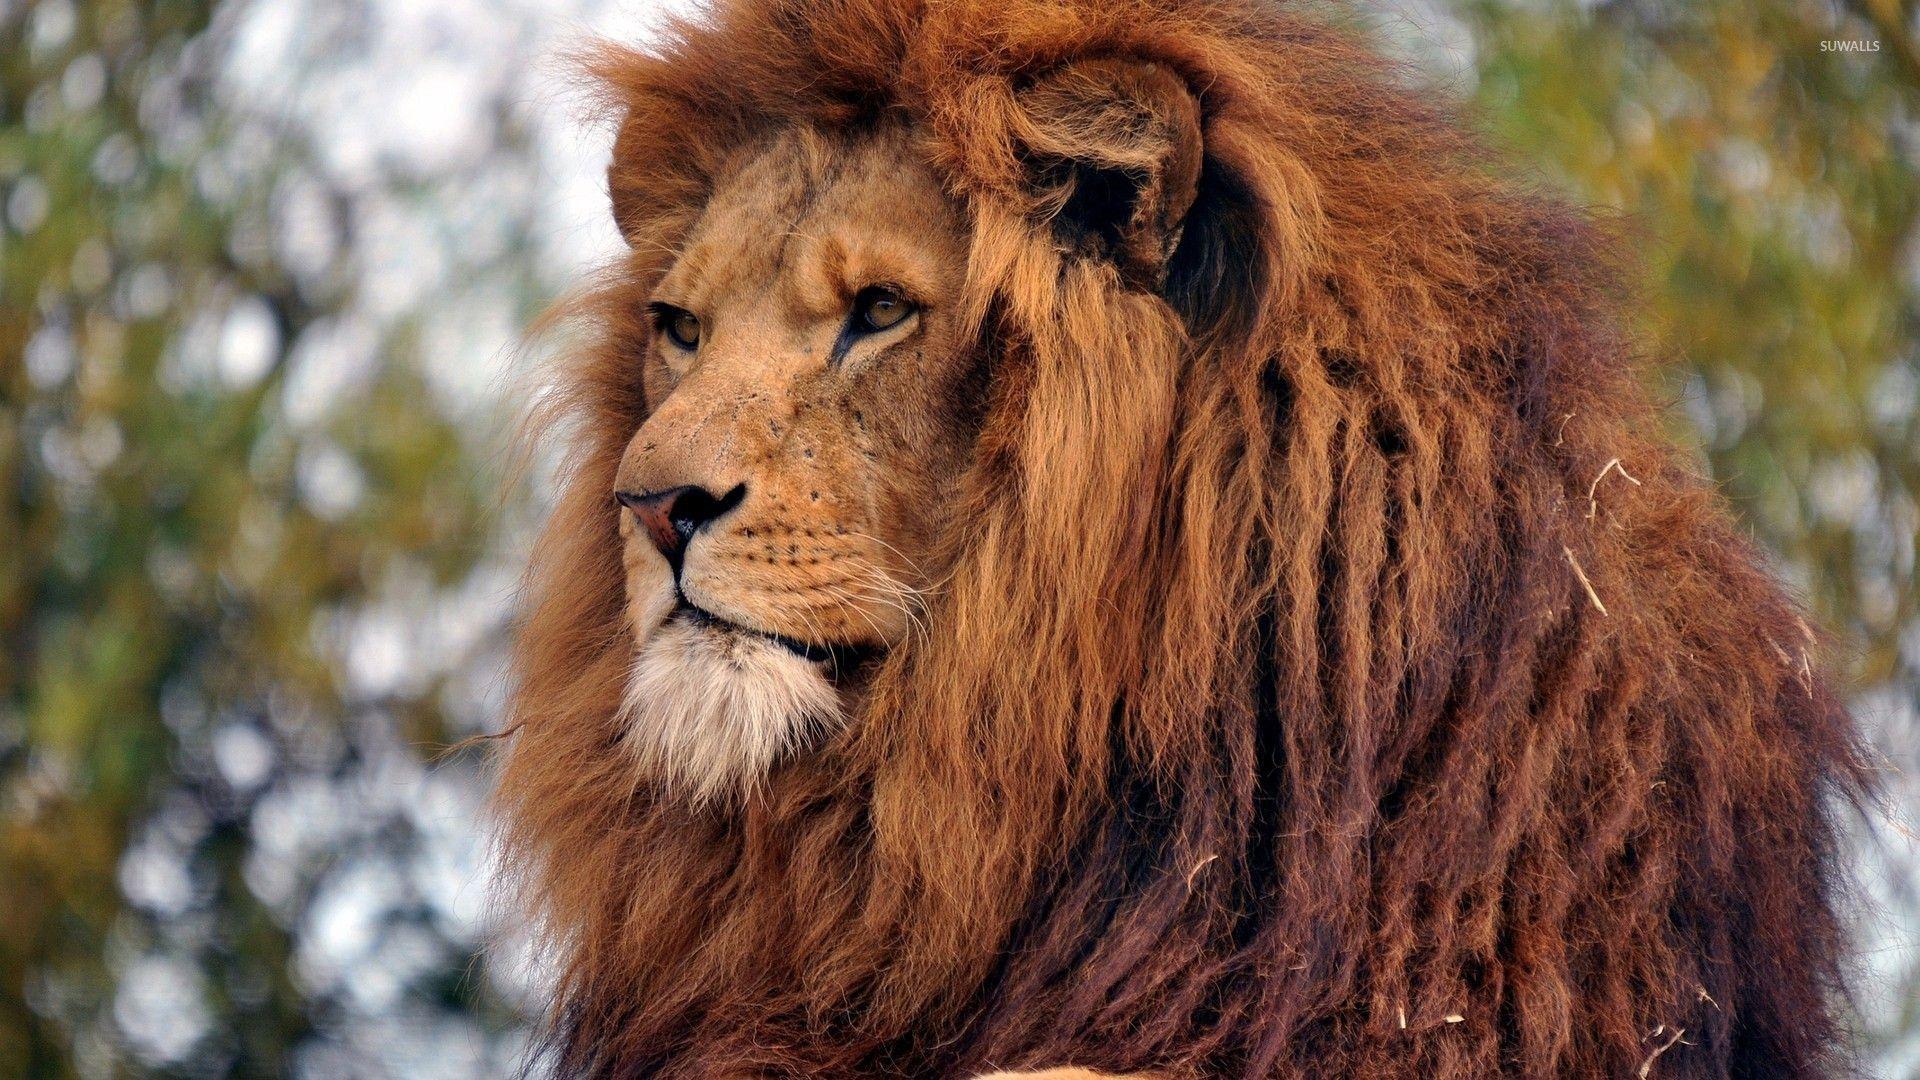 Majestic Lion Wallpapers - Top Free Majestic Lion Backgrounds